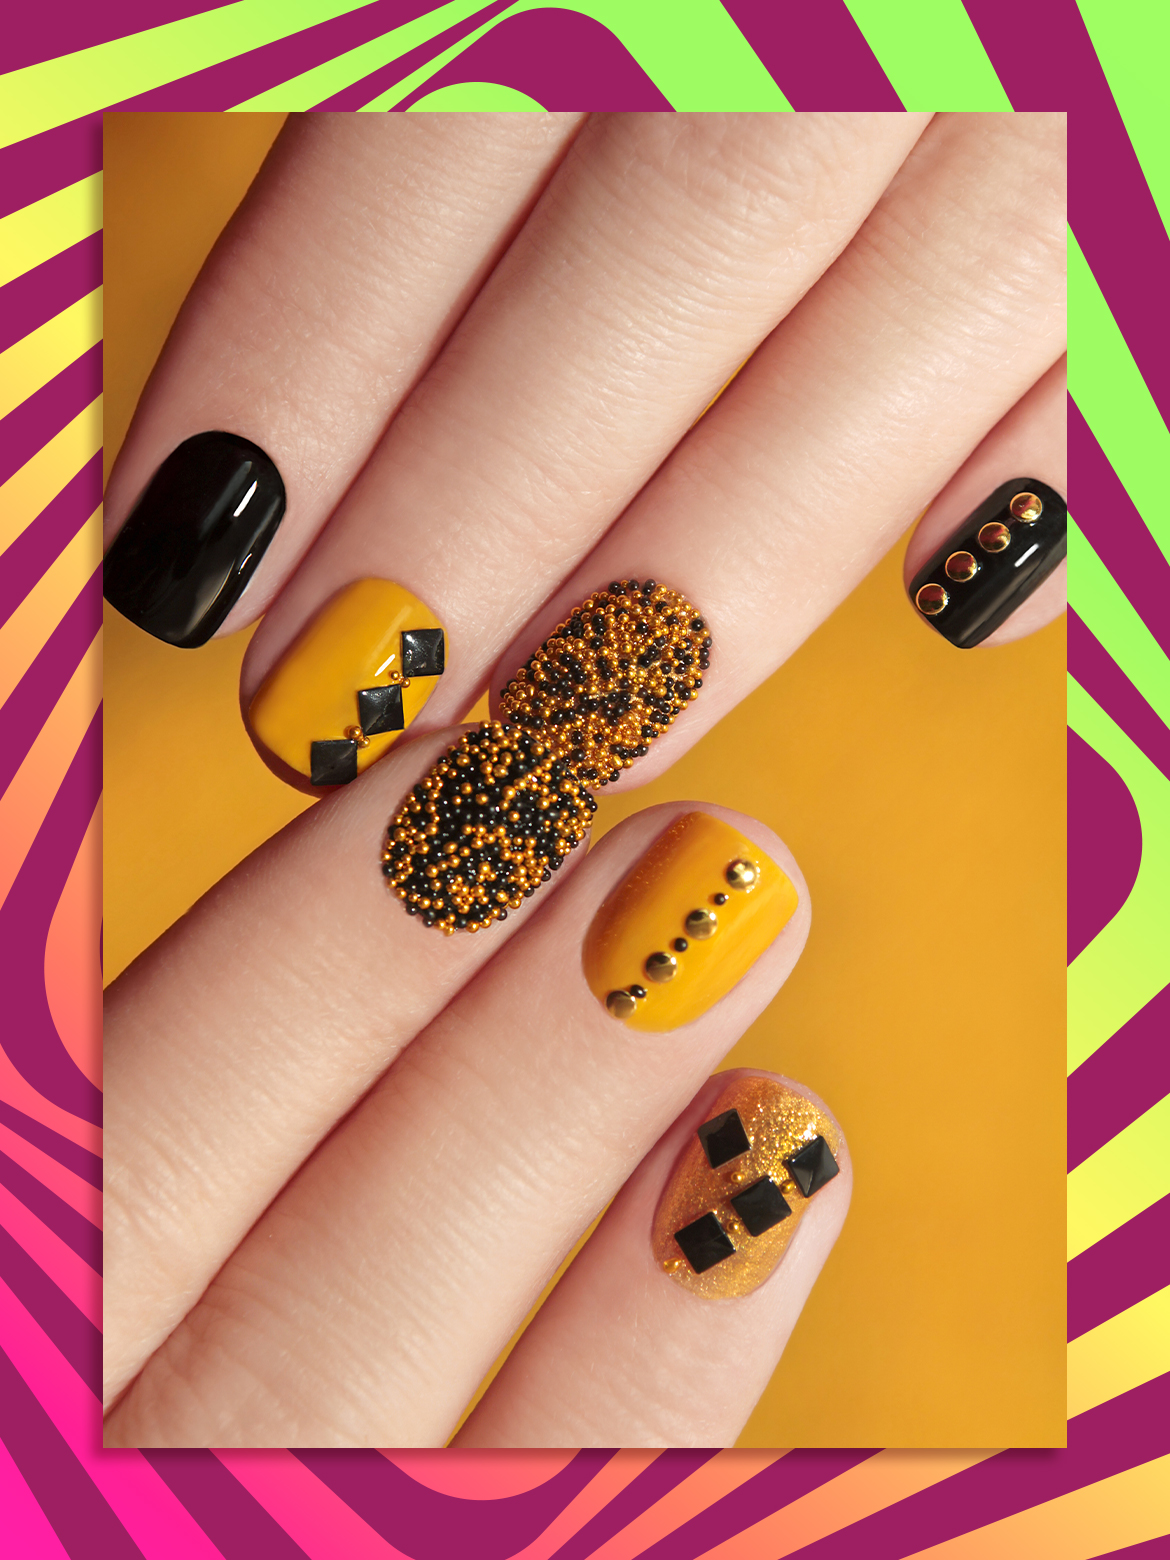 Winter UV Gel Nails: Stay Trendy and Season-Ready with These Nail Art-seedfund.vn